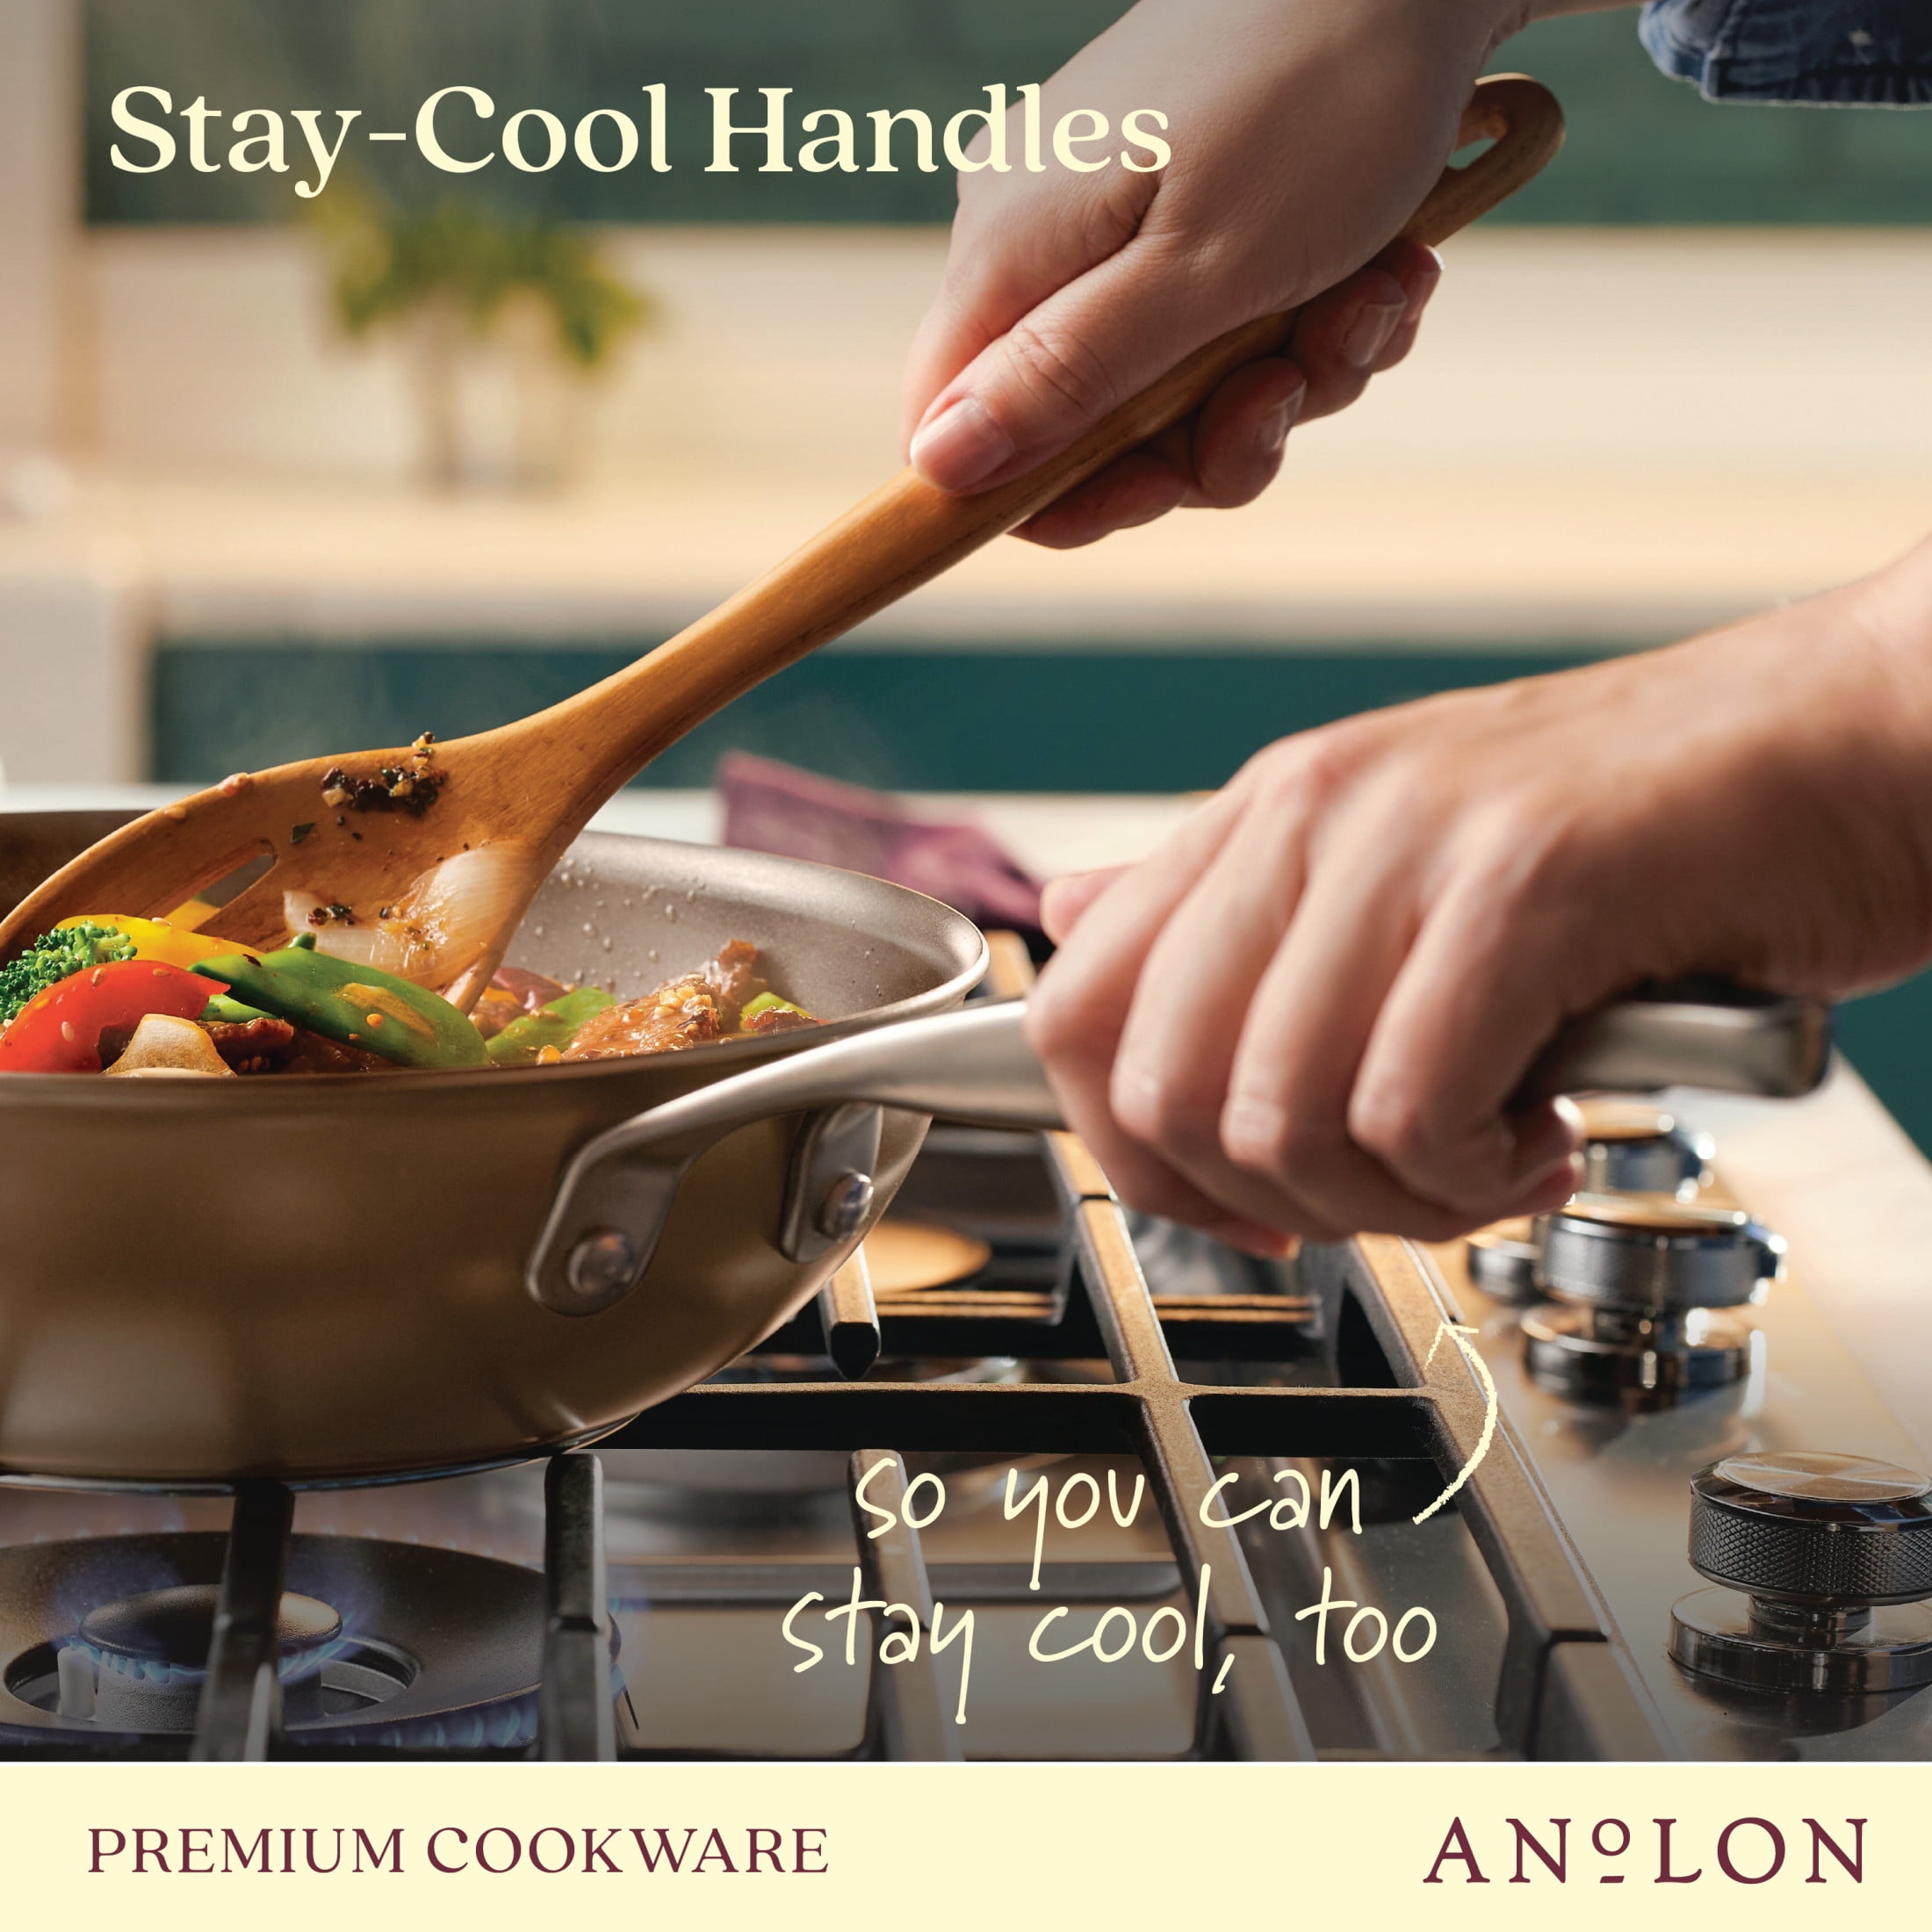 Anolon Advanced Hard Anodized Nonstick Stir Fry Wok Pan with Lid, 14 Inch,  Bronze Brown